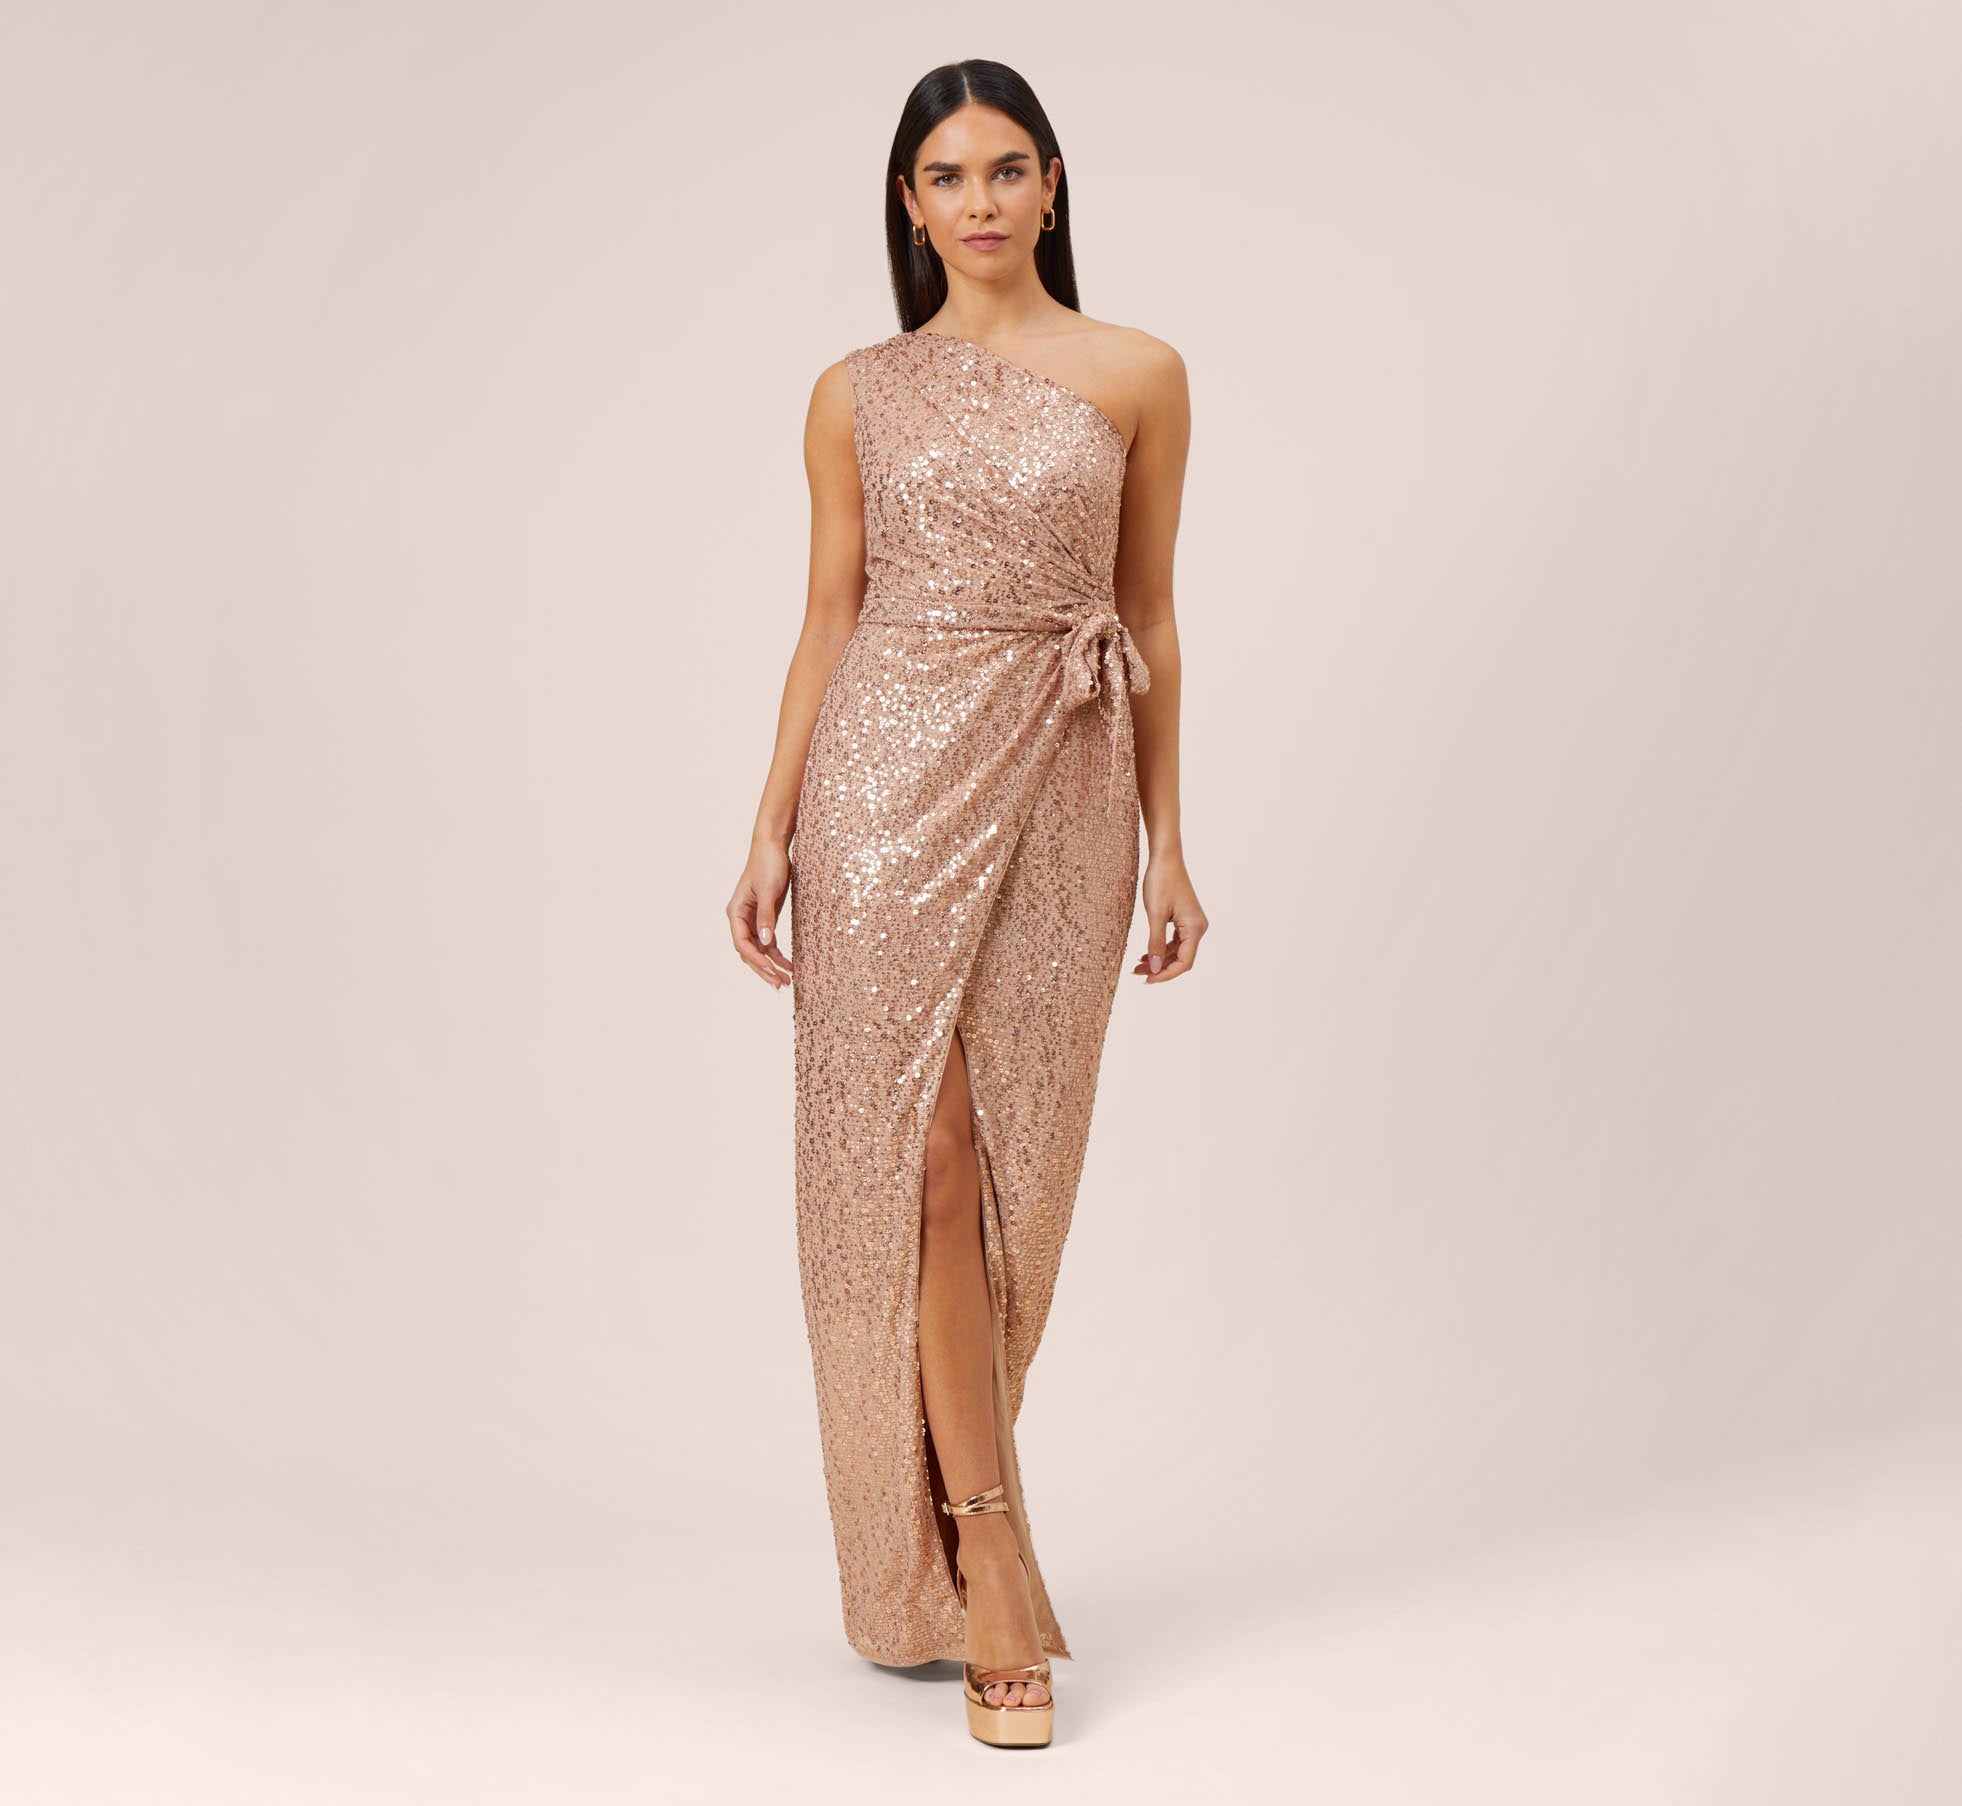 Adrianna Papell Sequined One Shoulder Wedding Dress